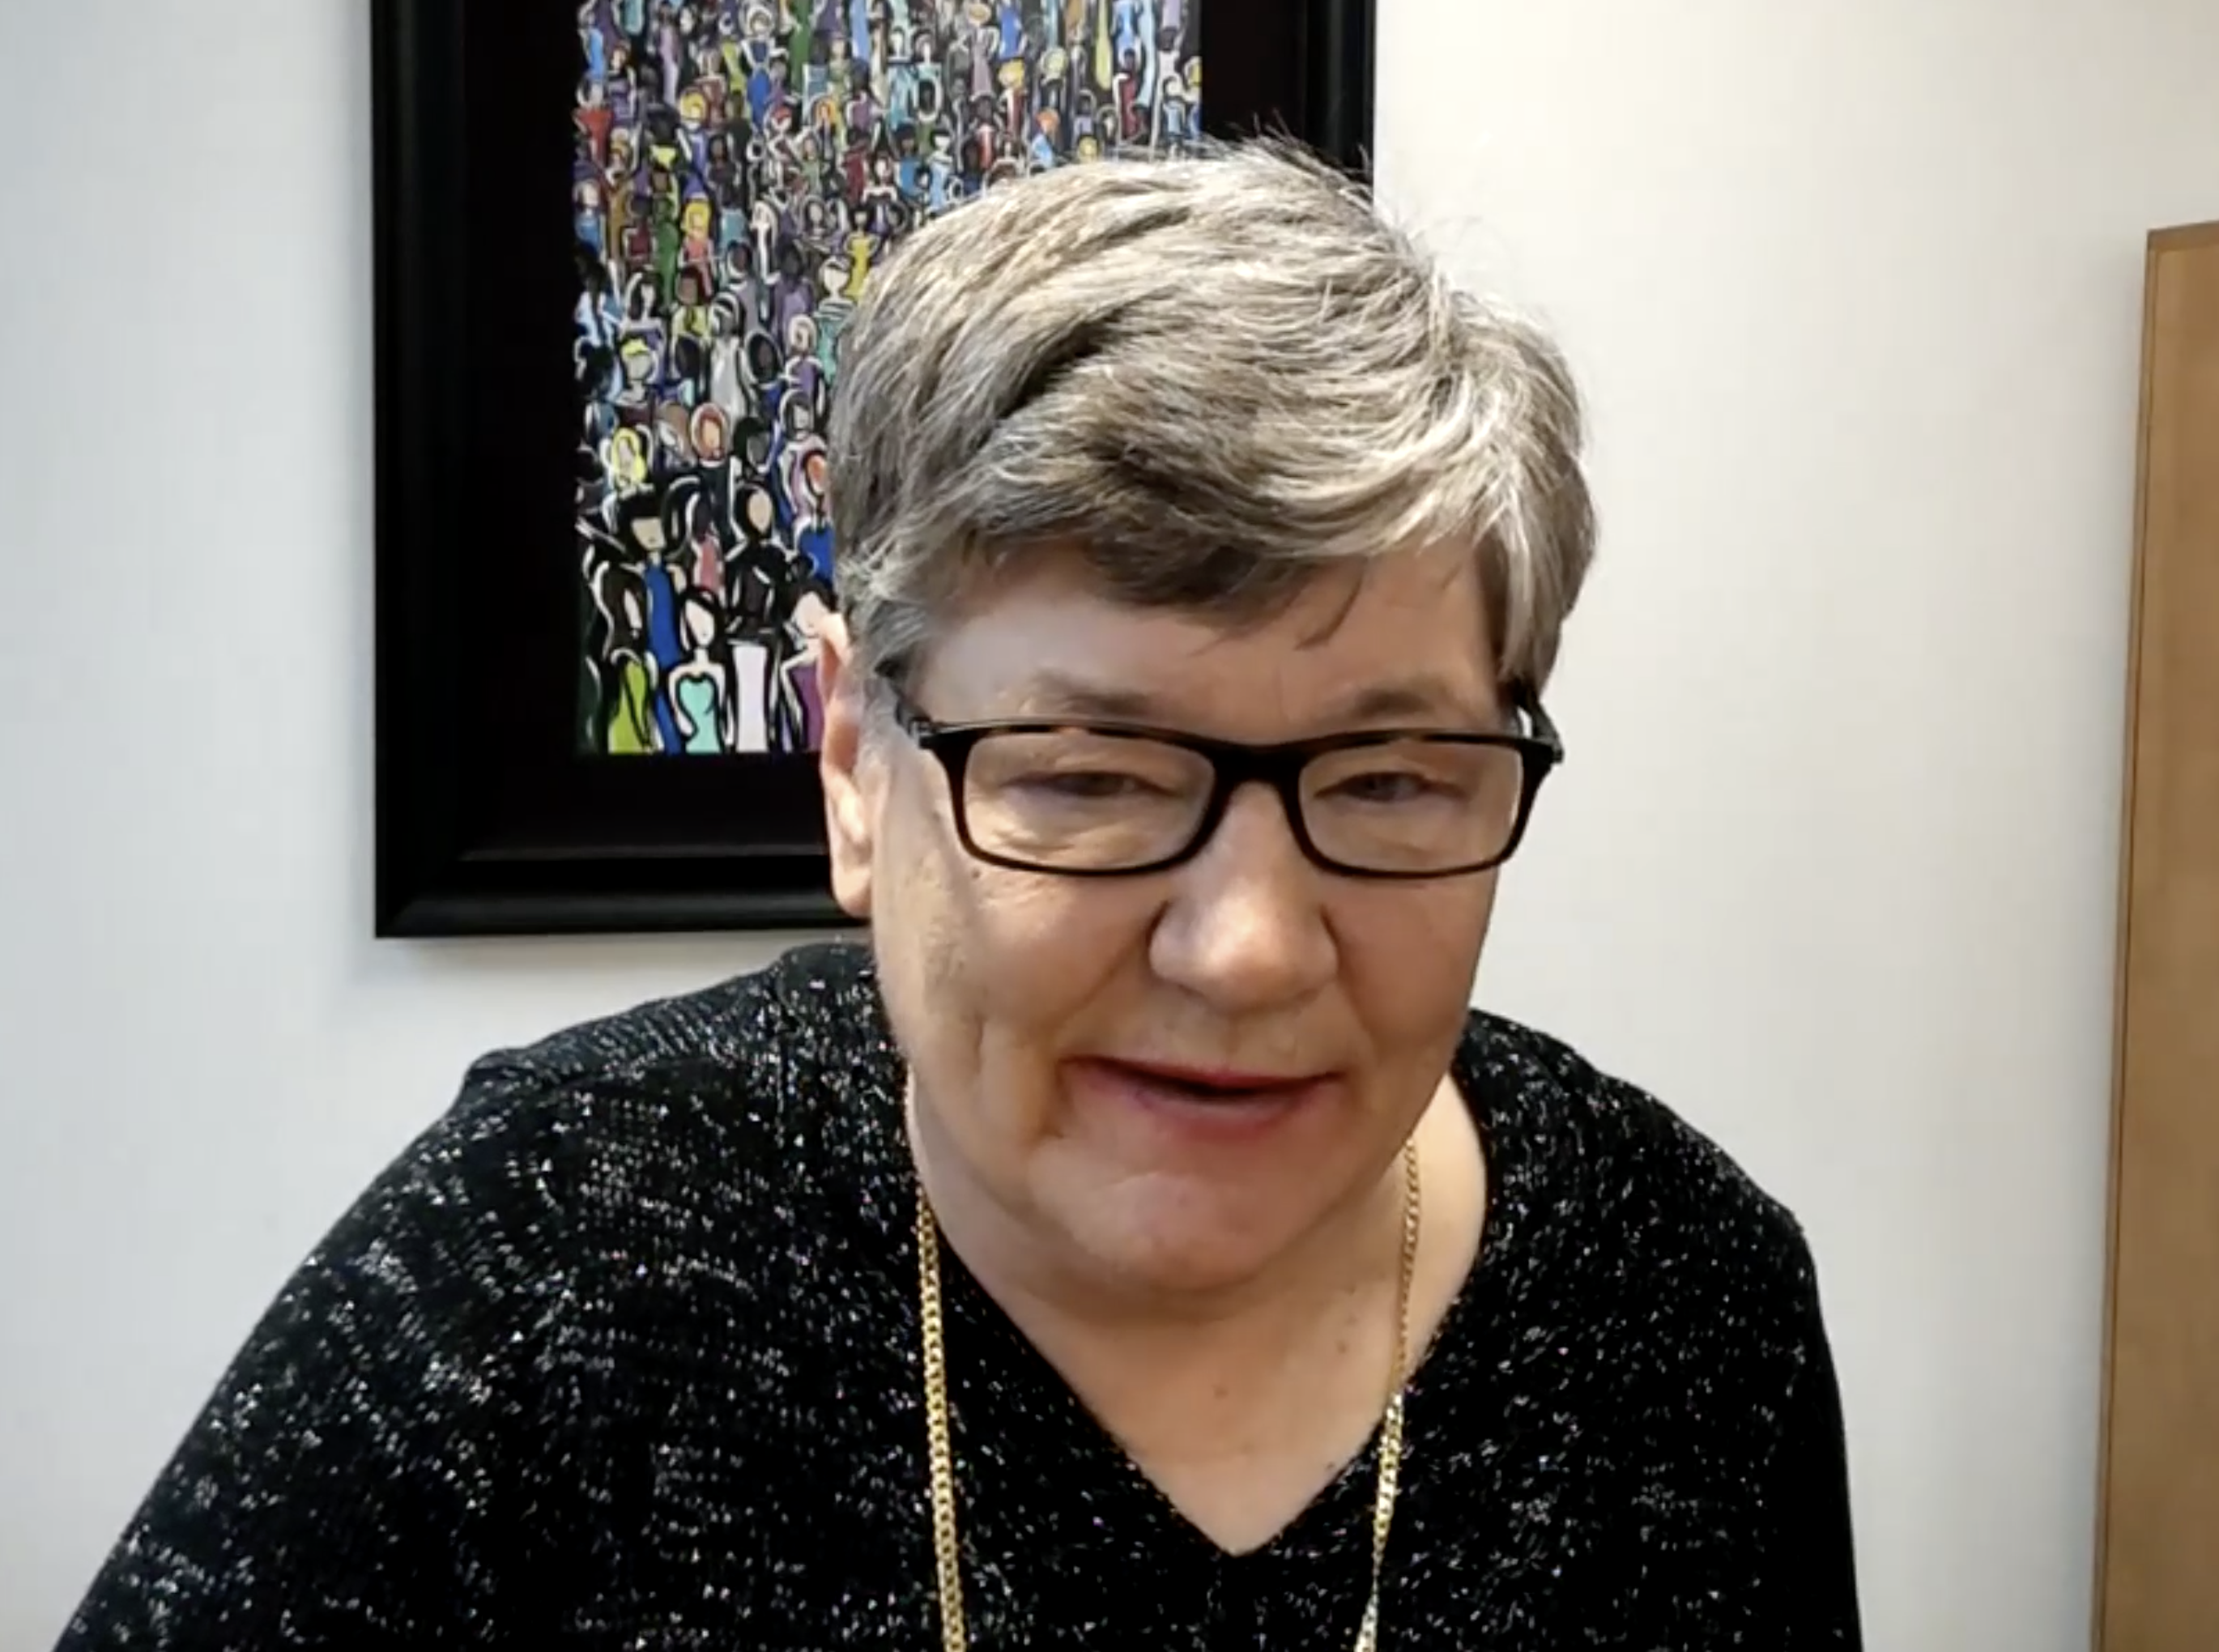 Photo of Jan Jordan giving a Zoom presentation. She is earring a black-and-white-flecked top and a gold necklace. Behind her is a painting of a crowd of people.